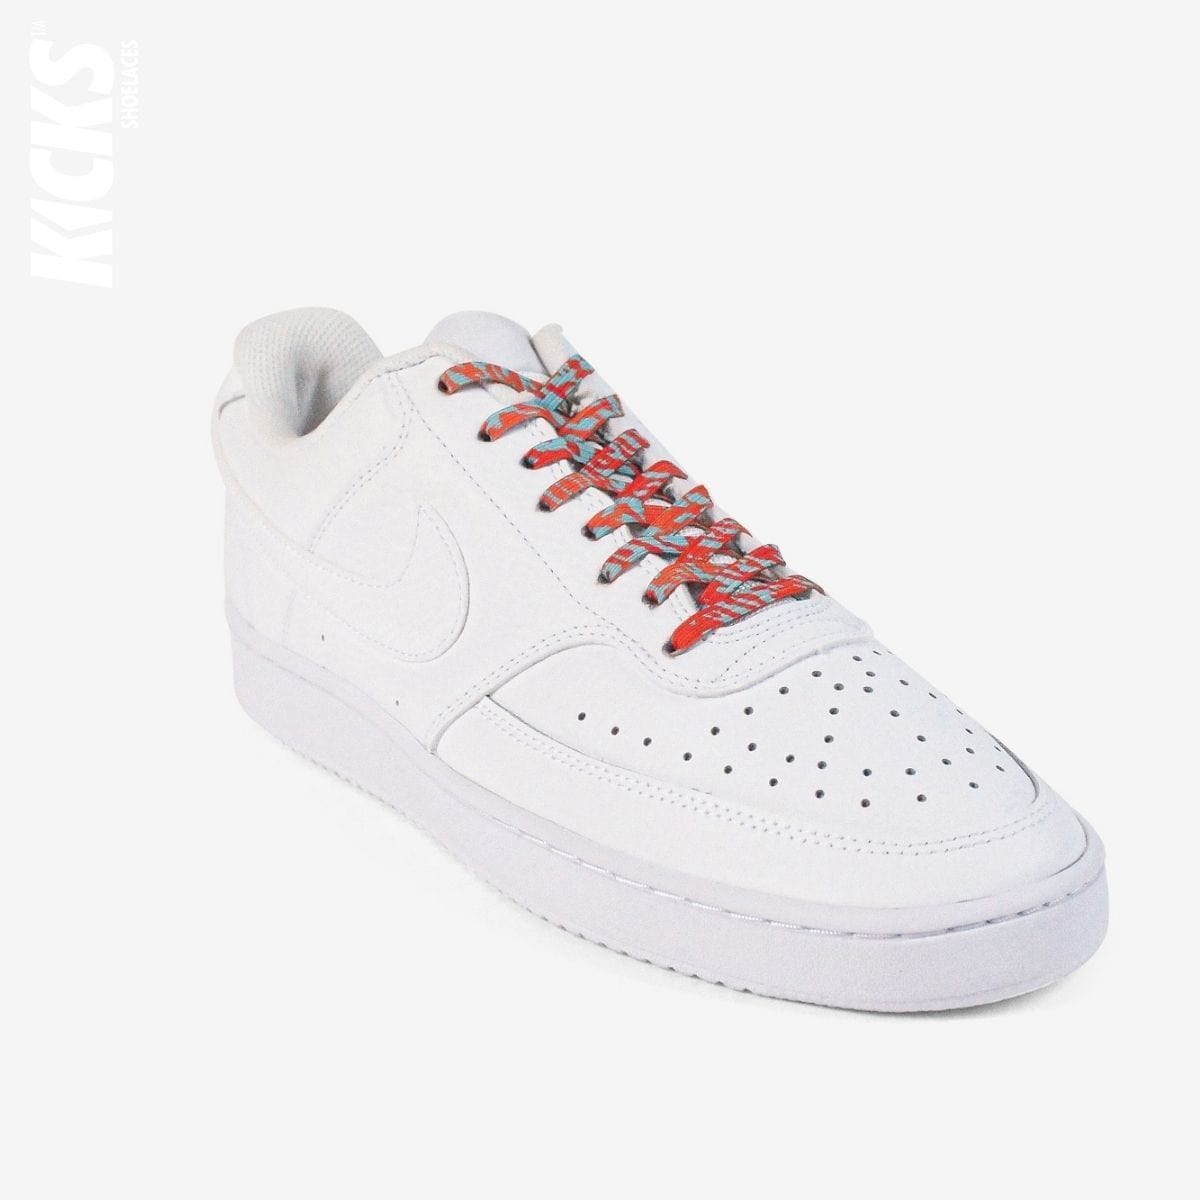 elastic-no-tie-shoelaces-with-red-camo-lace-on-nike-white-sneakers